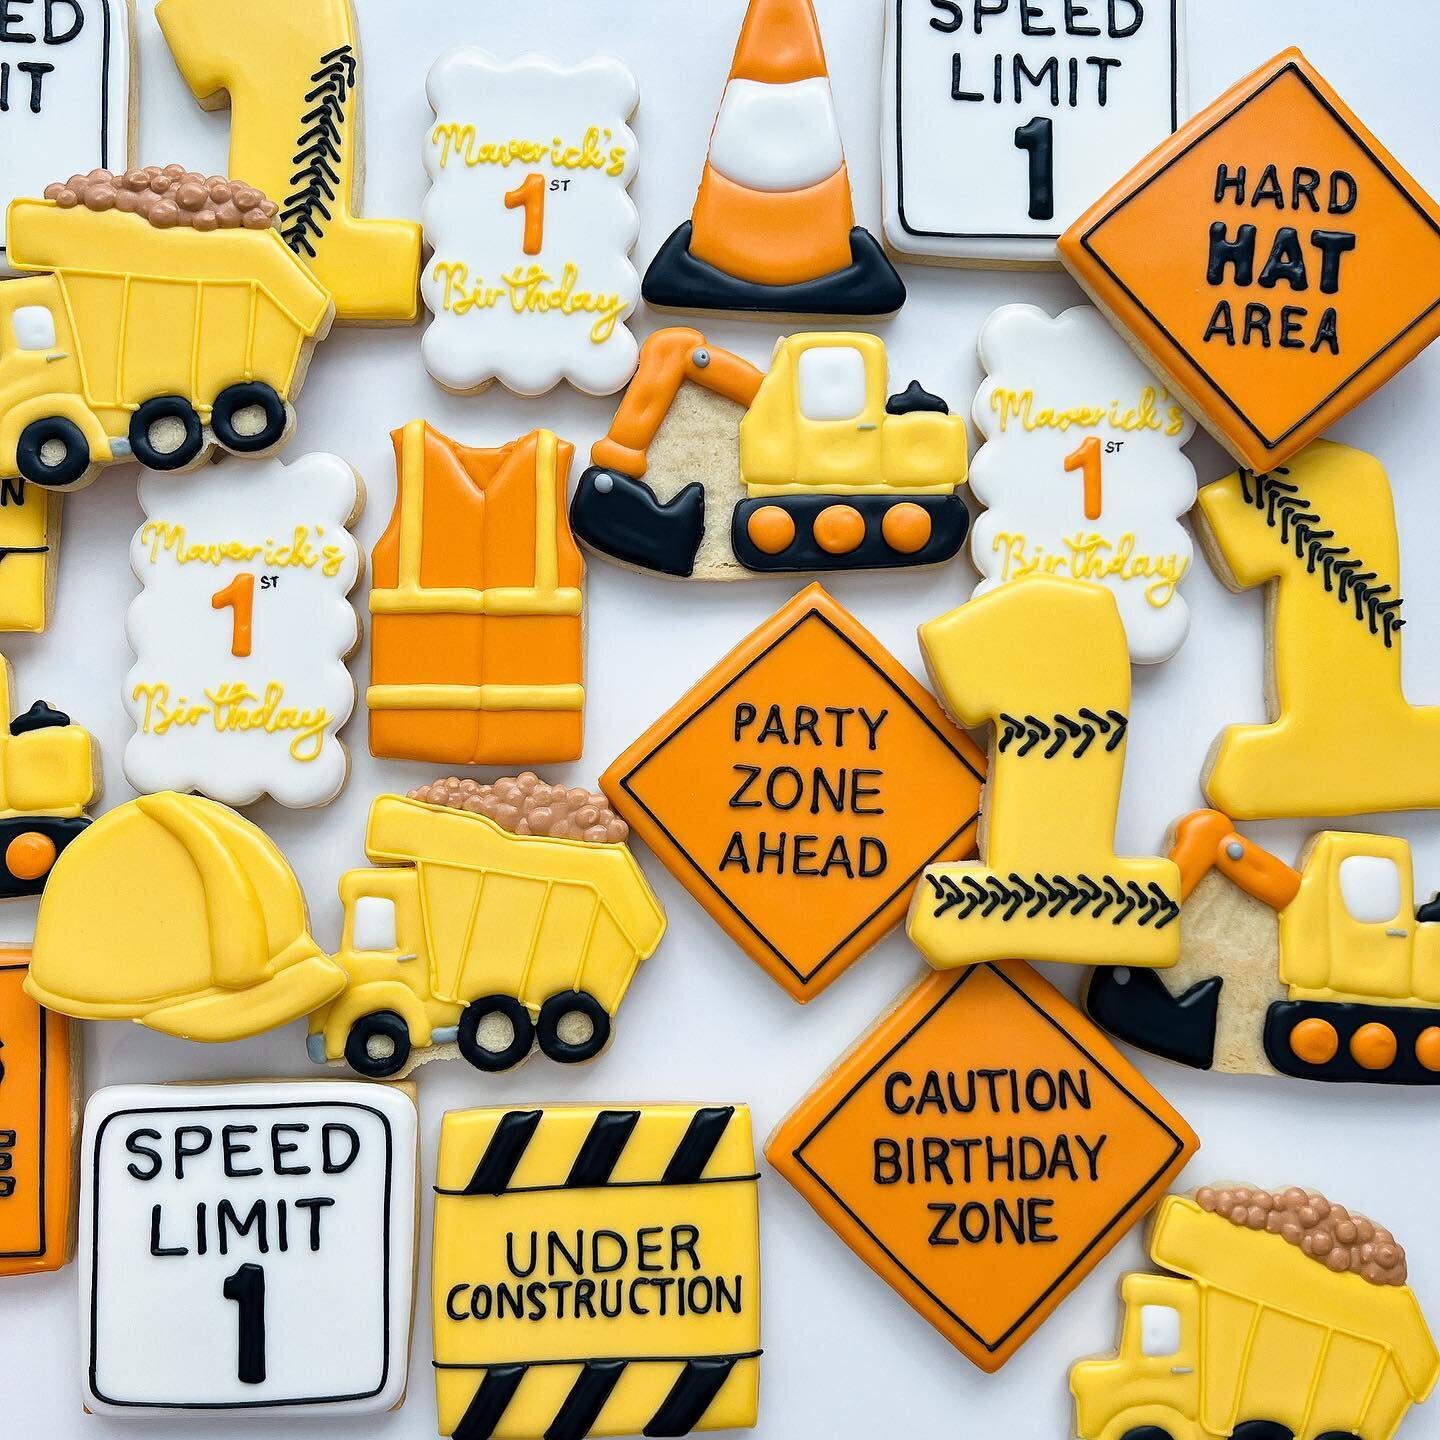 🦺CAUTION🦺

Party at your own risk! I love the way this 🔨construction🪚 birthday set turned out. It&rsquo;s so fun and colourful🟠🟡

#samanthassweethouse #customcookies #cookiesofinstagram #angusontario #georgina #newmarketontario #bradfordontario